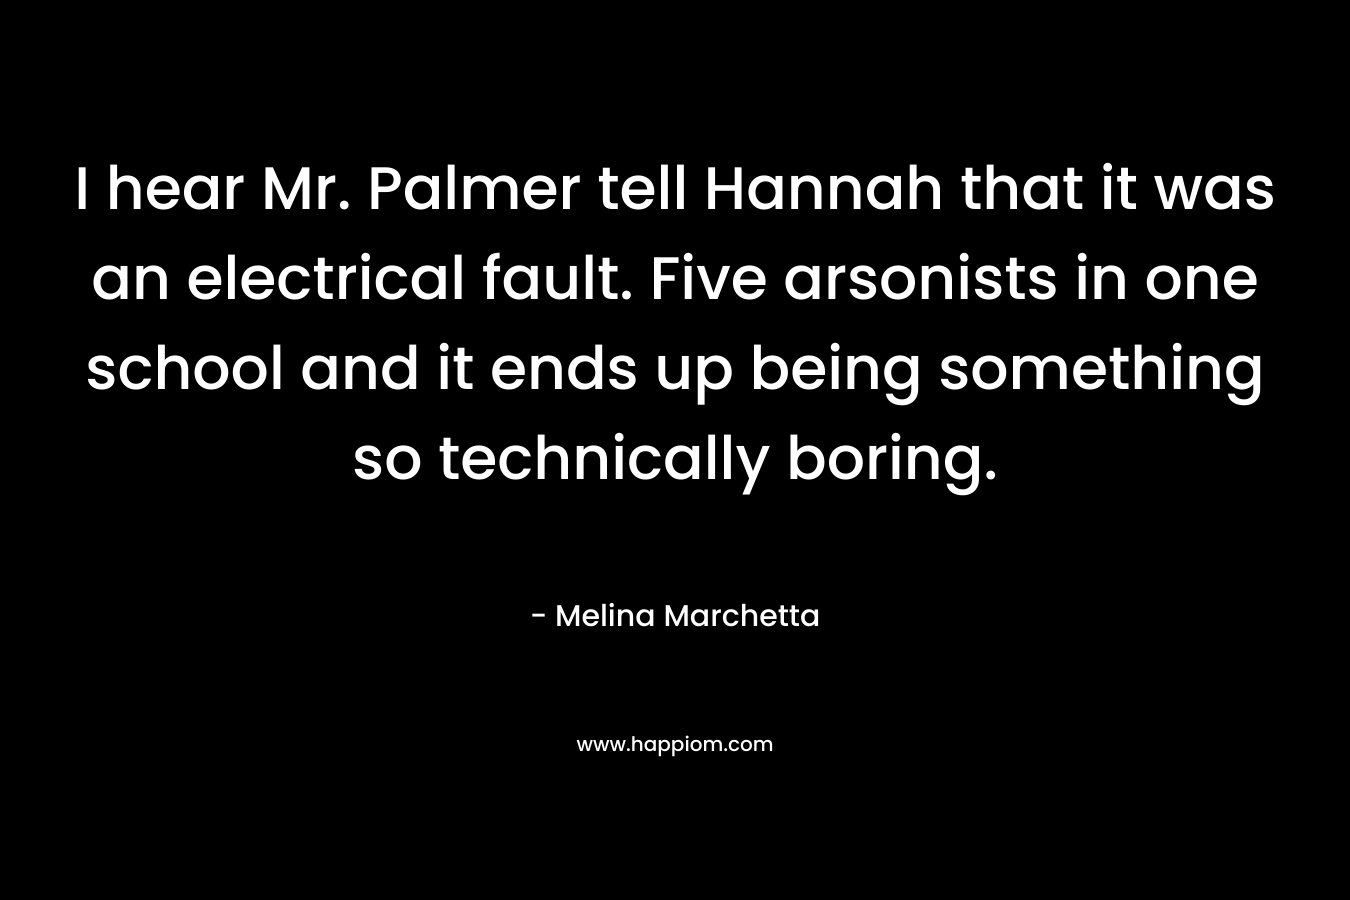 I hear Mr. Palmer tell Hannah that it was an electrical fault. Five arsonists in one school and it ends up being something so technically boring. – Melina Marchetta